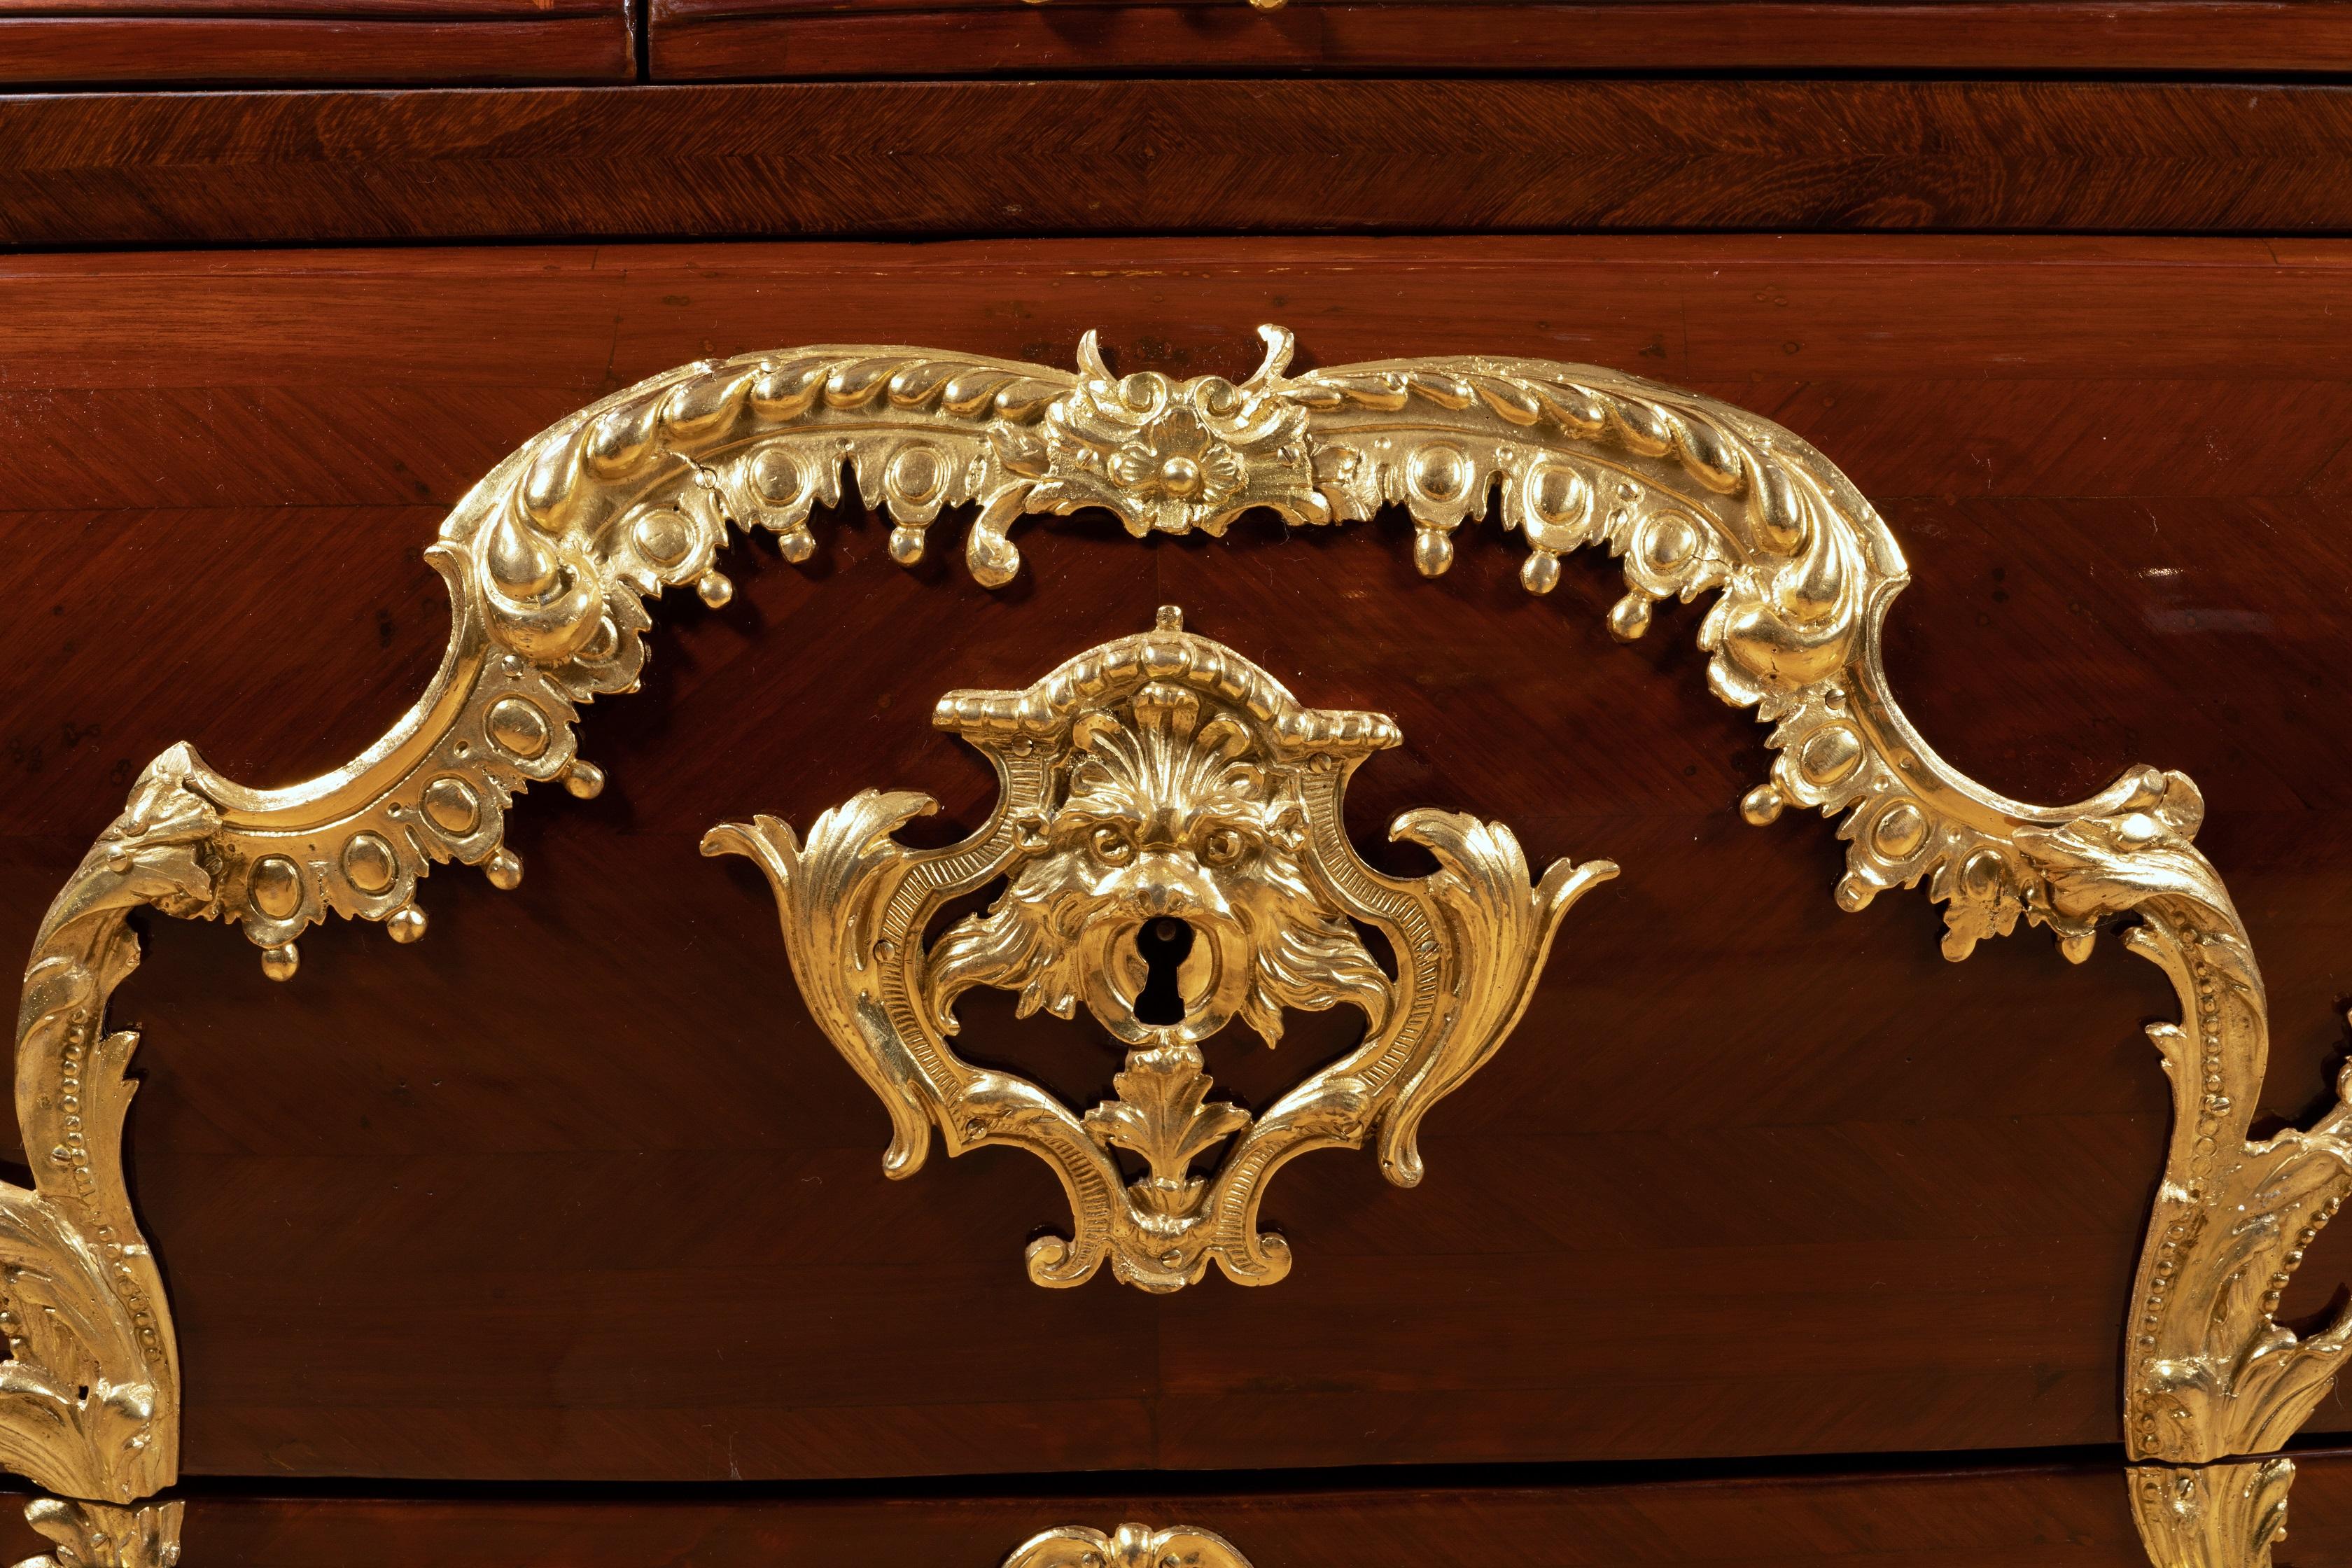 French 18th Century Regence Ormolu-Mounted Commode by Etienne Doirat For Sale 5